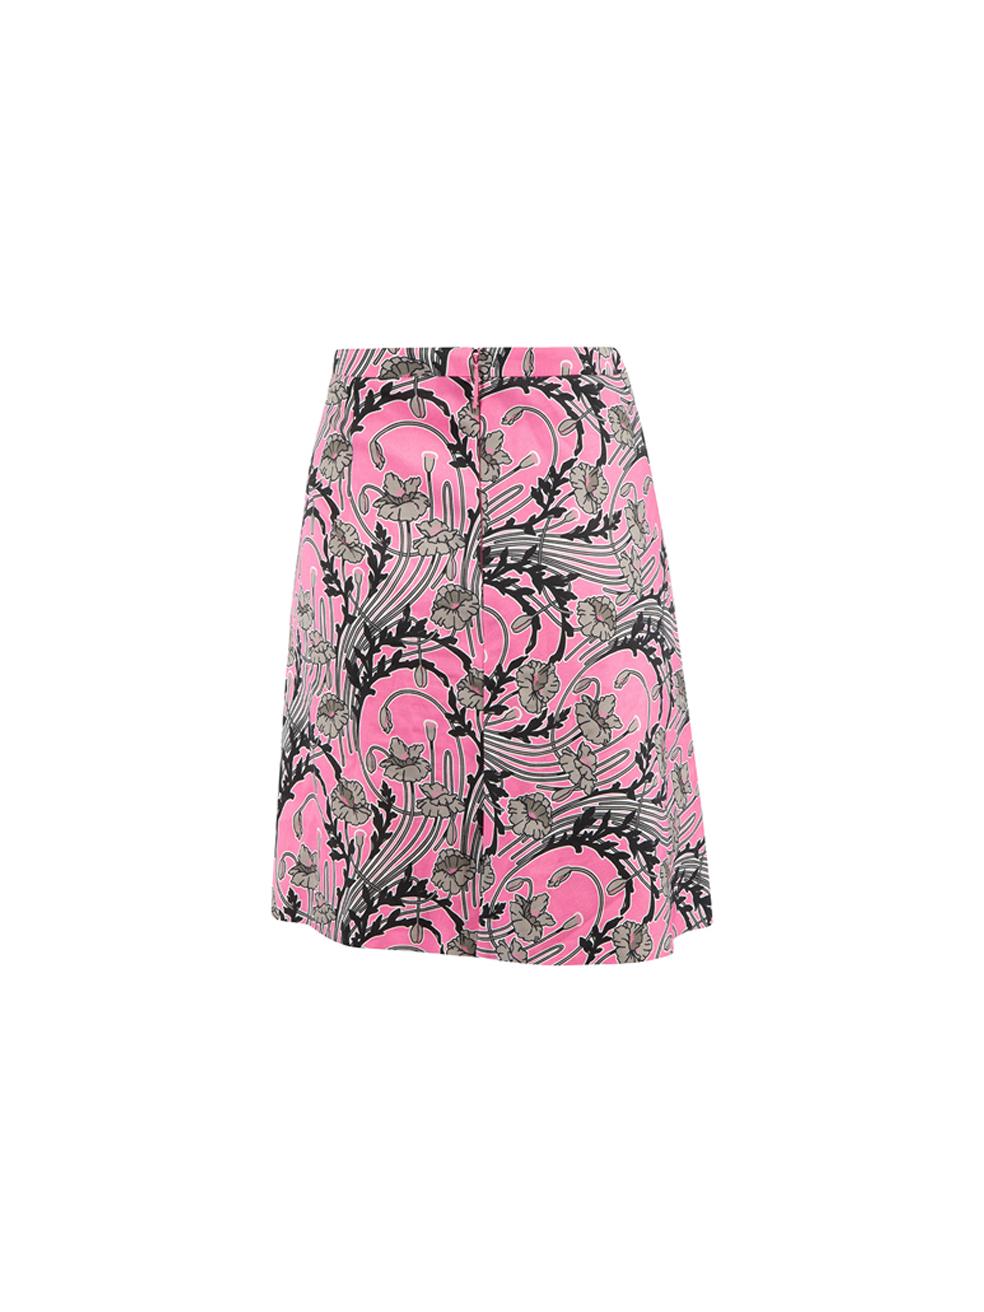 Christopher Kane Pink Pleated Detail Floral Print Skirt Size M In Good Condition For Sale In London, GB